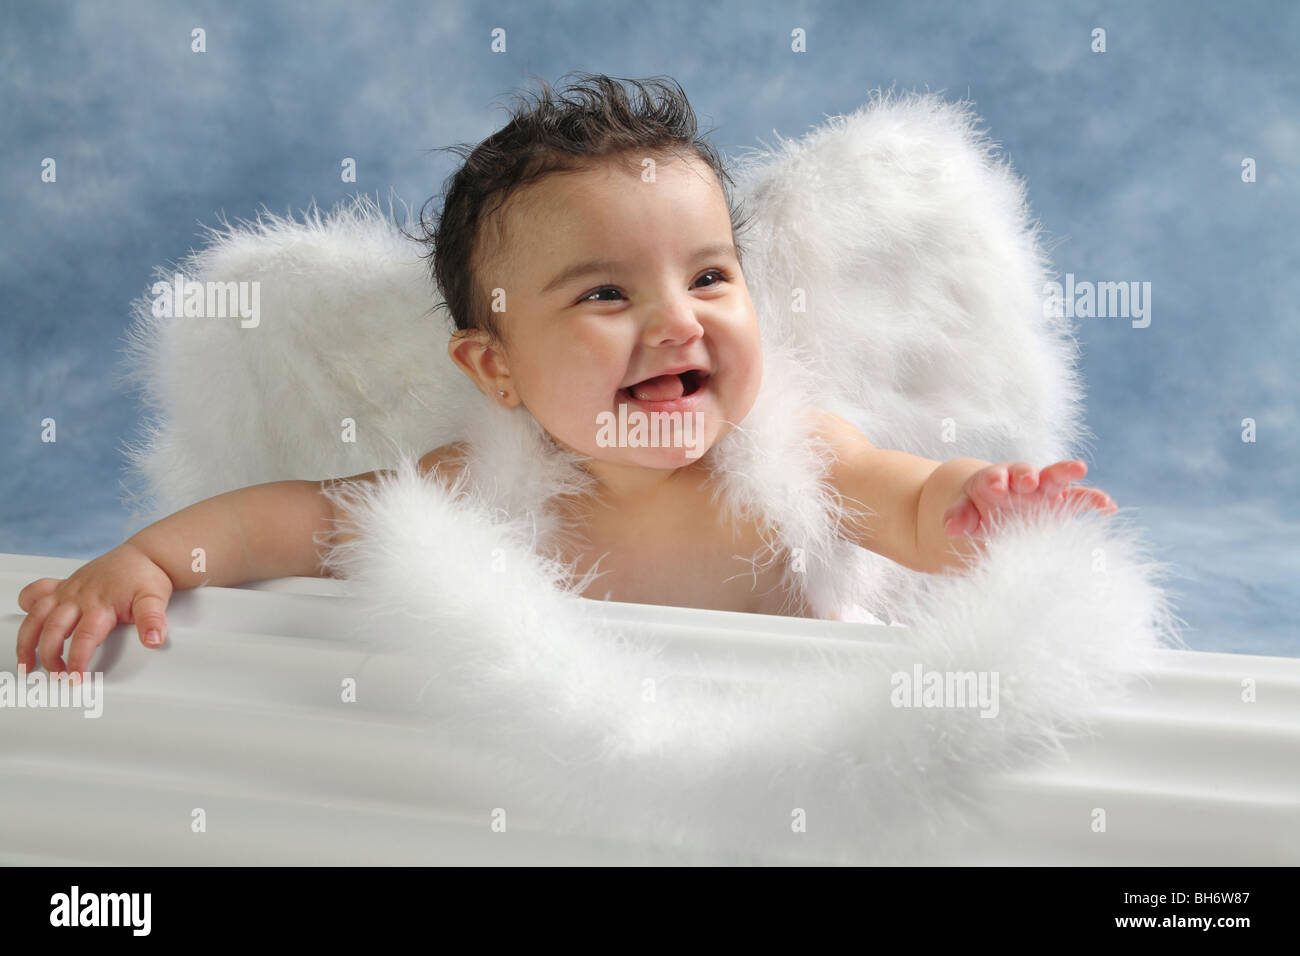 Hispanic baby girl with big smile look on her face and wearing angel wings in a studio Stock Photo